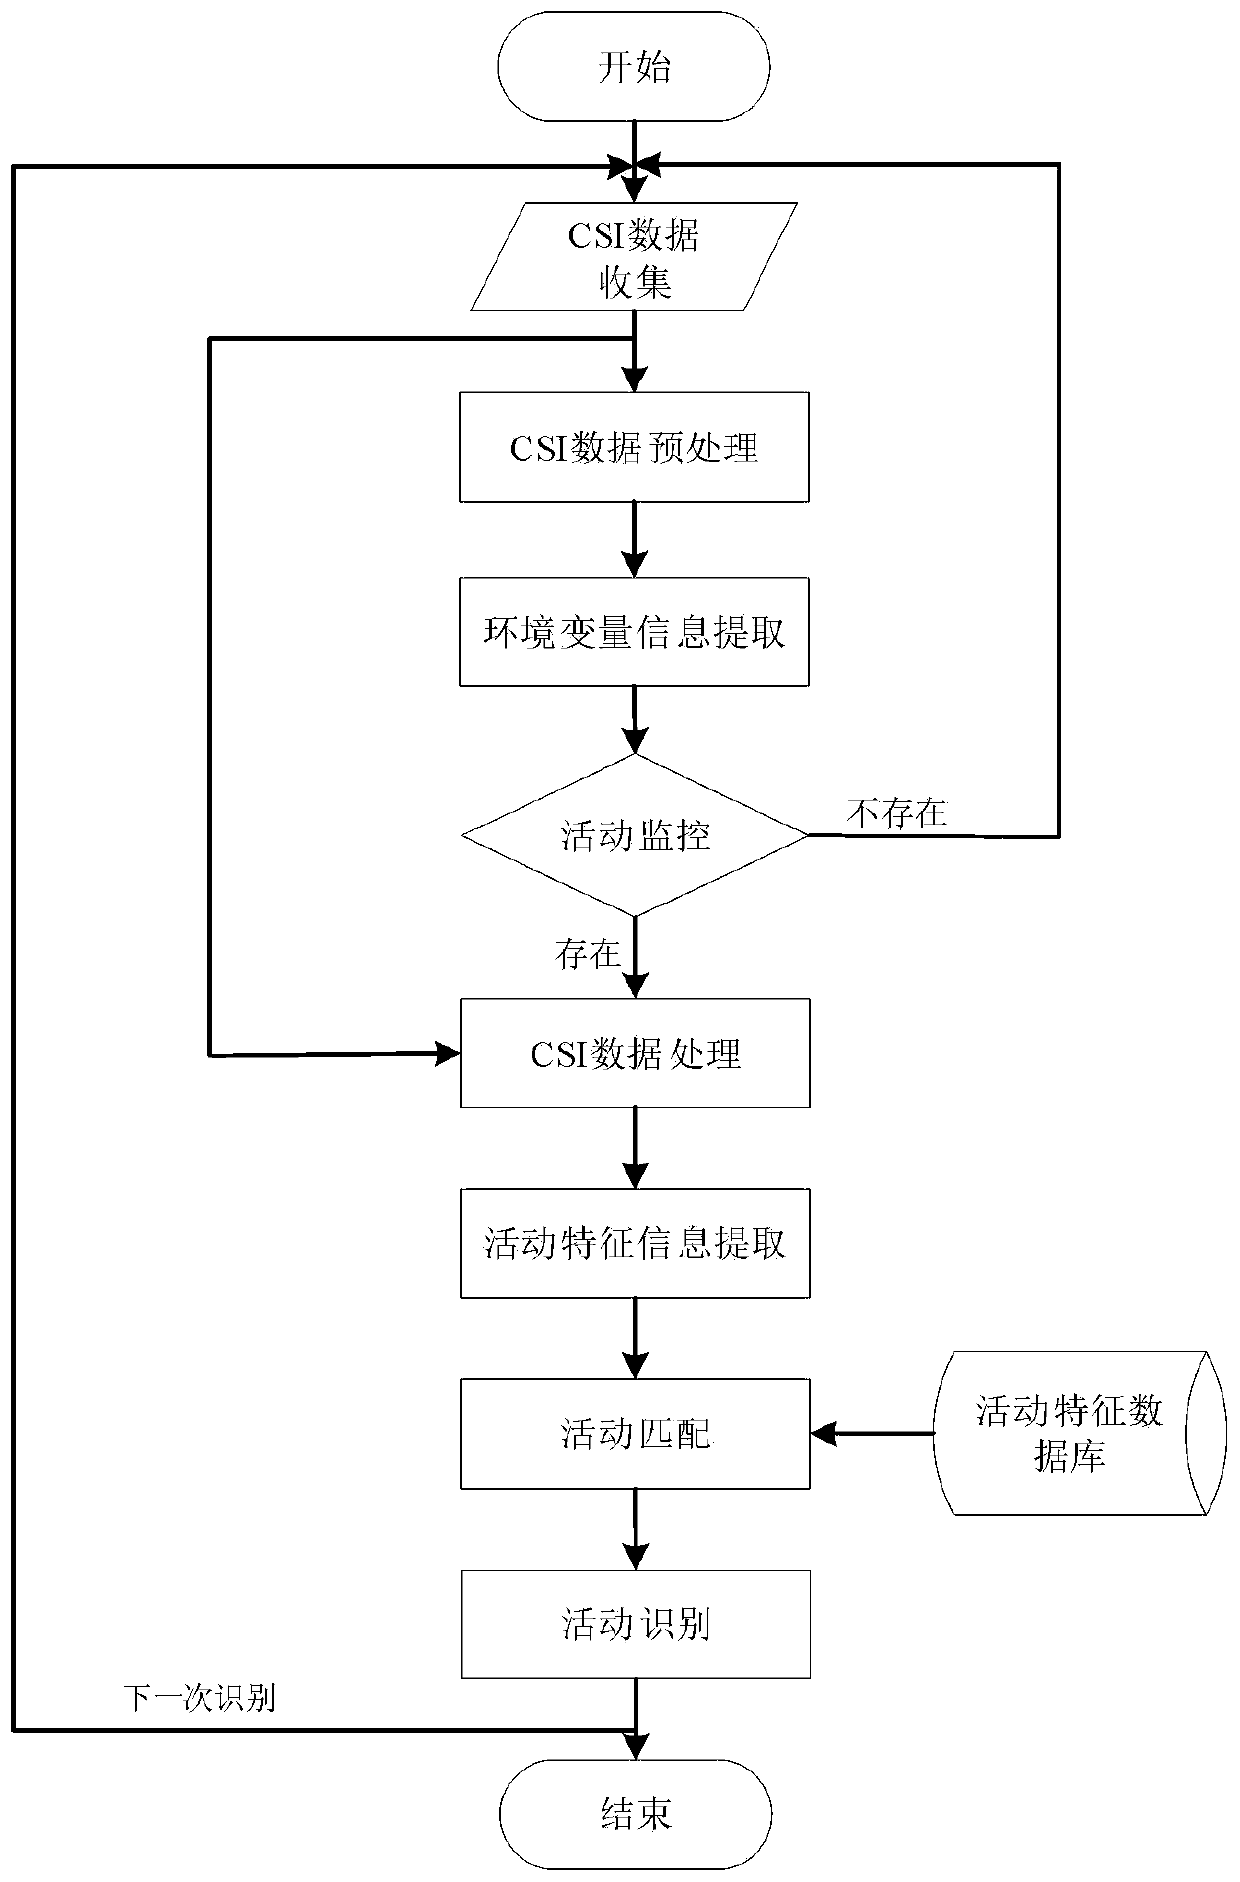 Indoor personnel activity identification method based on channel state information and man-machine interaction system